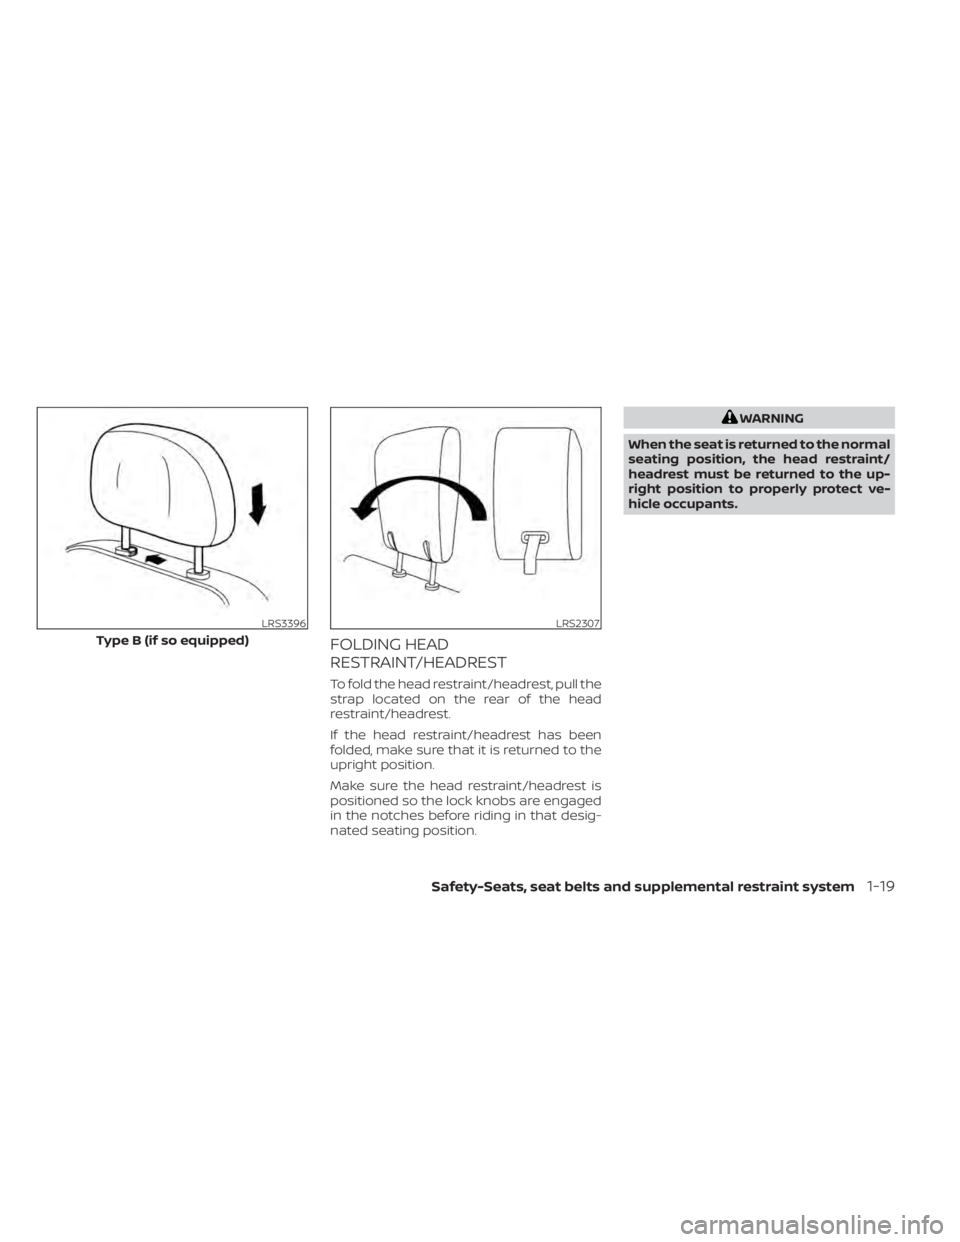 NISSAN PATHFINDER 2023 Service Manual FOLDING HEAD
RESTRAINT/HEADREST
To fold the head restraint/headrest, pull the
strap located on the rear of the head
restraint/headrest.
If the head restraint/headrest has been
folded, make sure that i